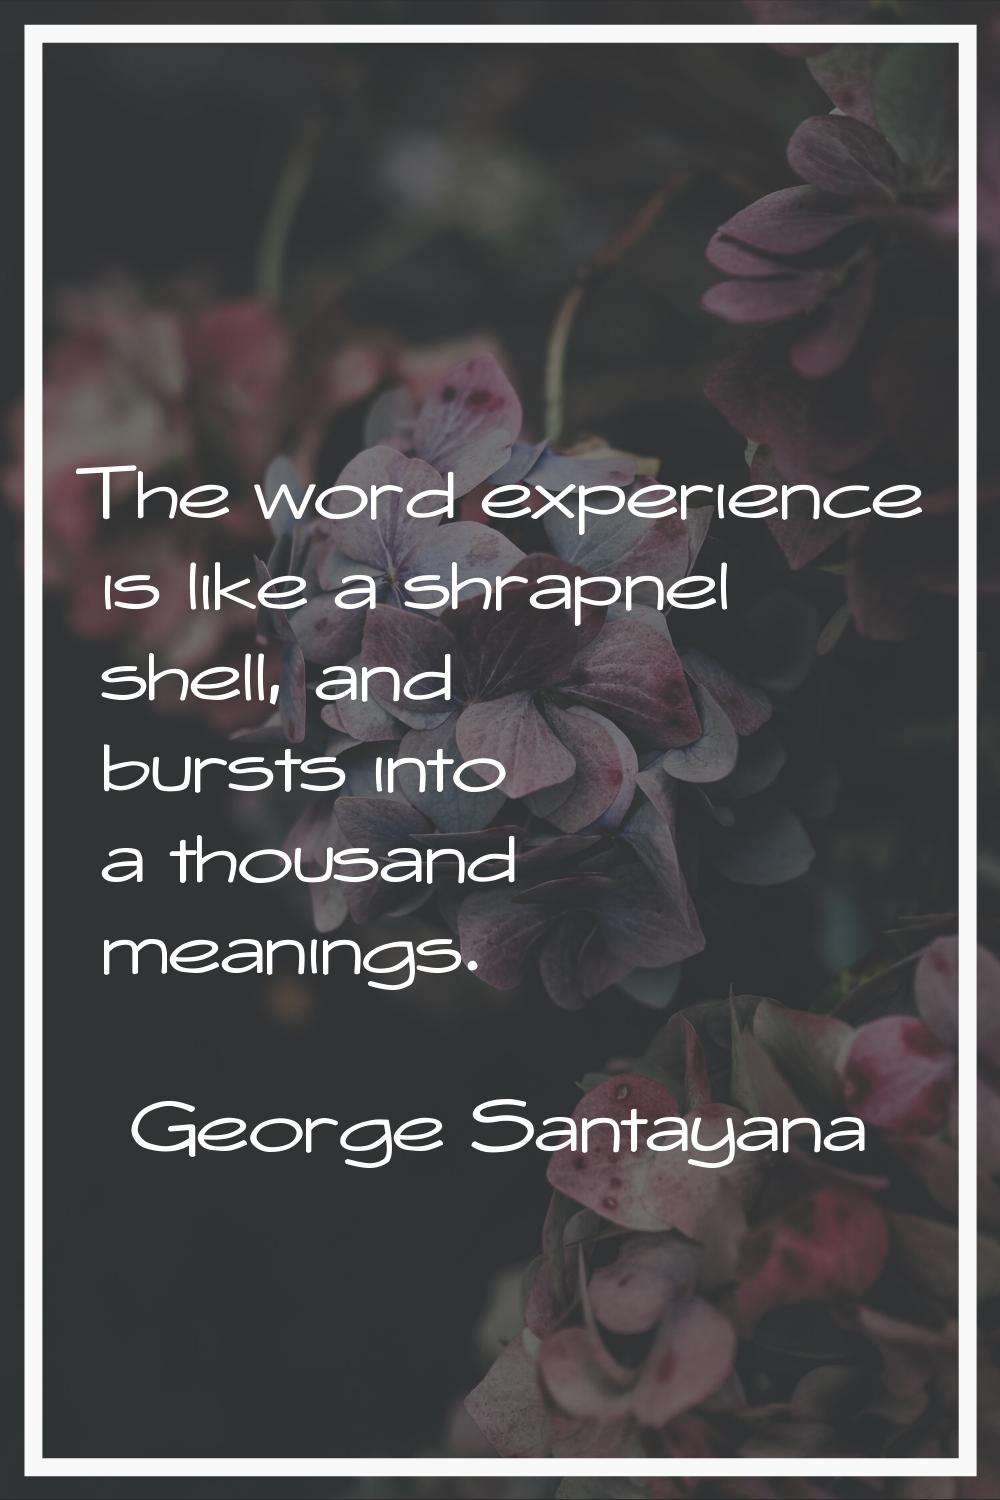 The word experience is like a shrapnel shell, and bursts into a thousand meanings.